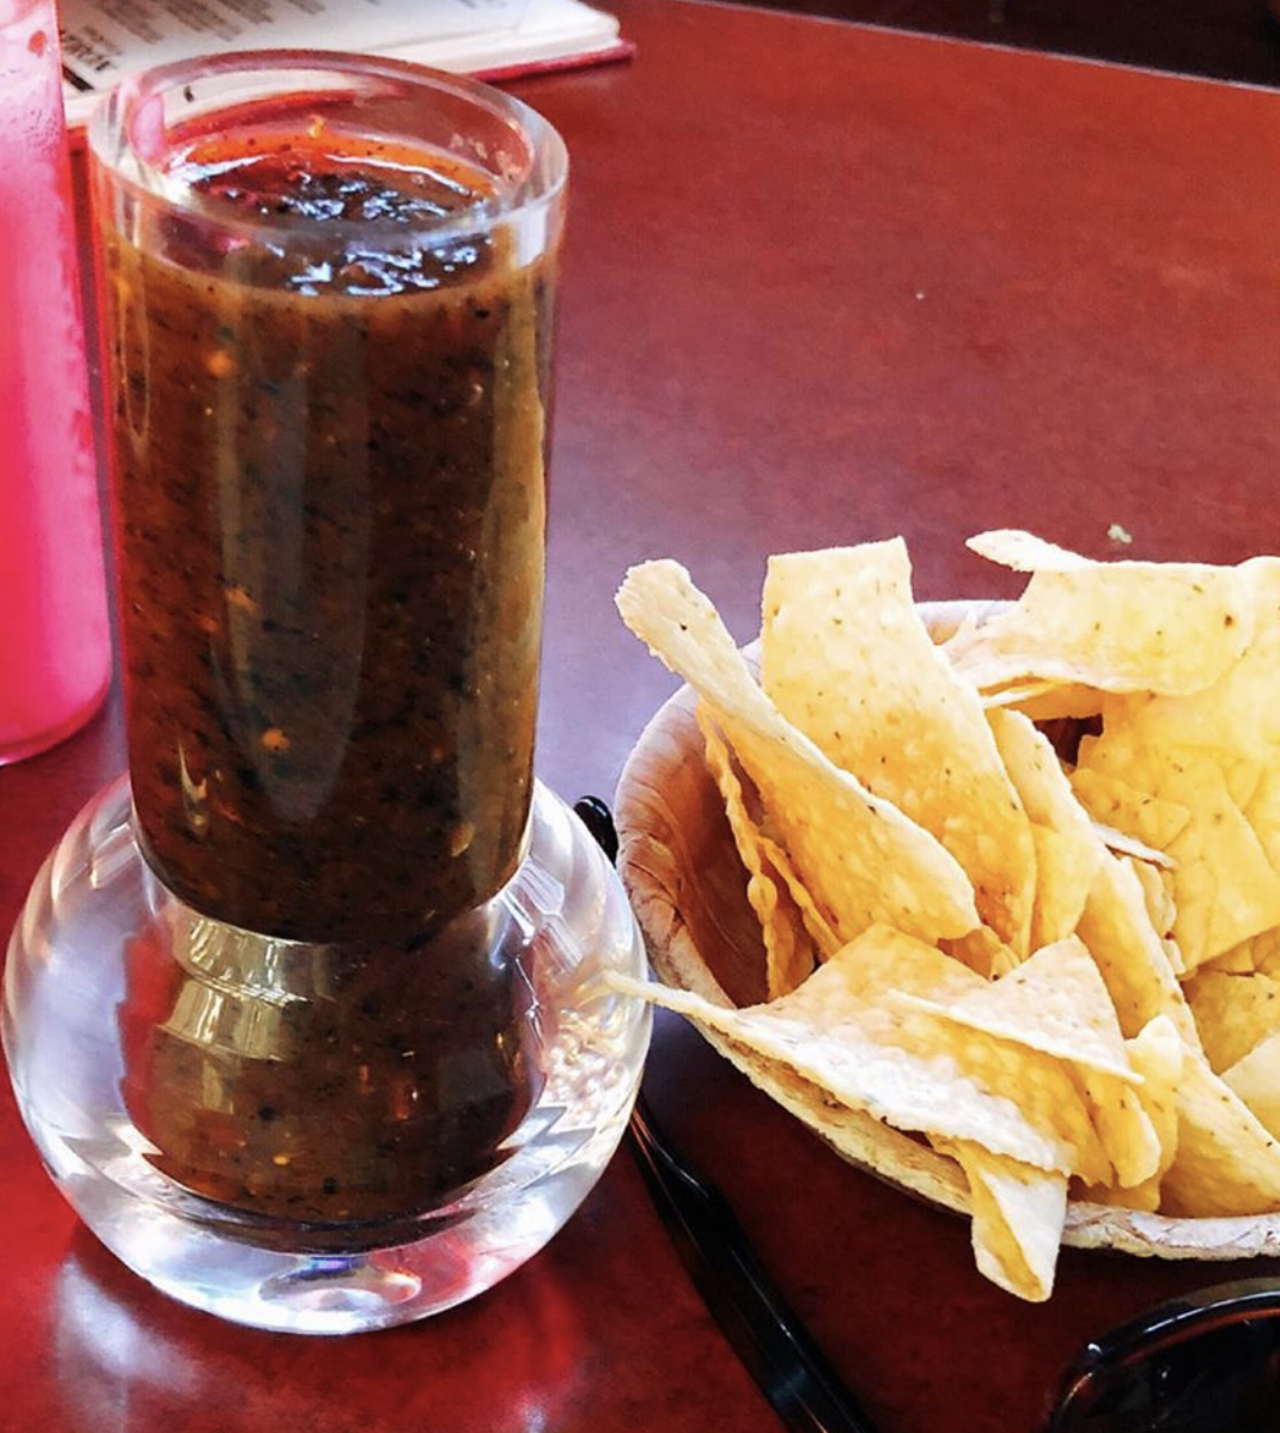 Rosario’s Salsa
Straight from the Rosario’s kitchen, circa 1986.
Find the recipe here.
Photo via Instagram/  Foodsportsbeer